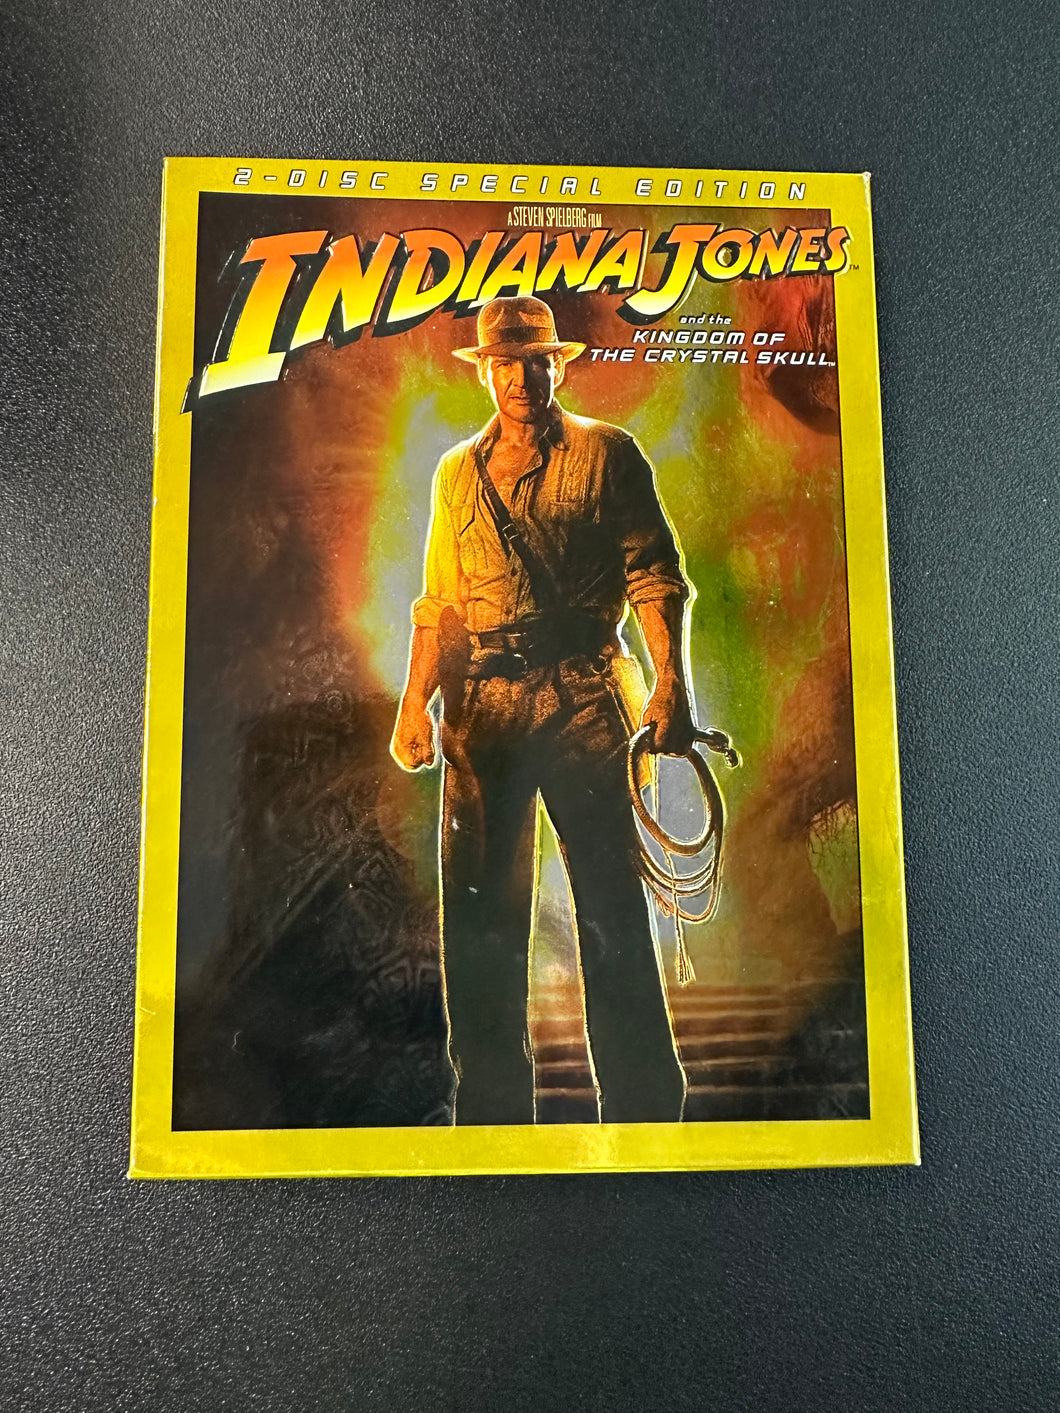 INDIANA JONES AND THE KINGDOM OF THE CRYSTAL SKULL 2 DISC SPECIAL EDITION DVD SET PREOWNED